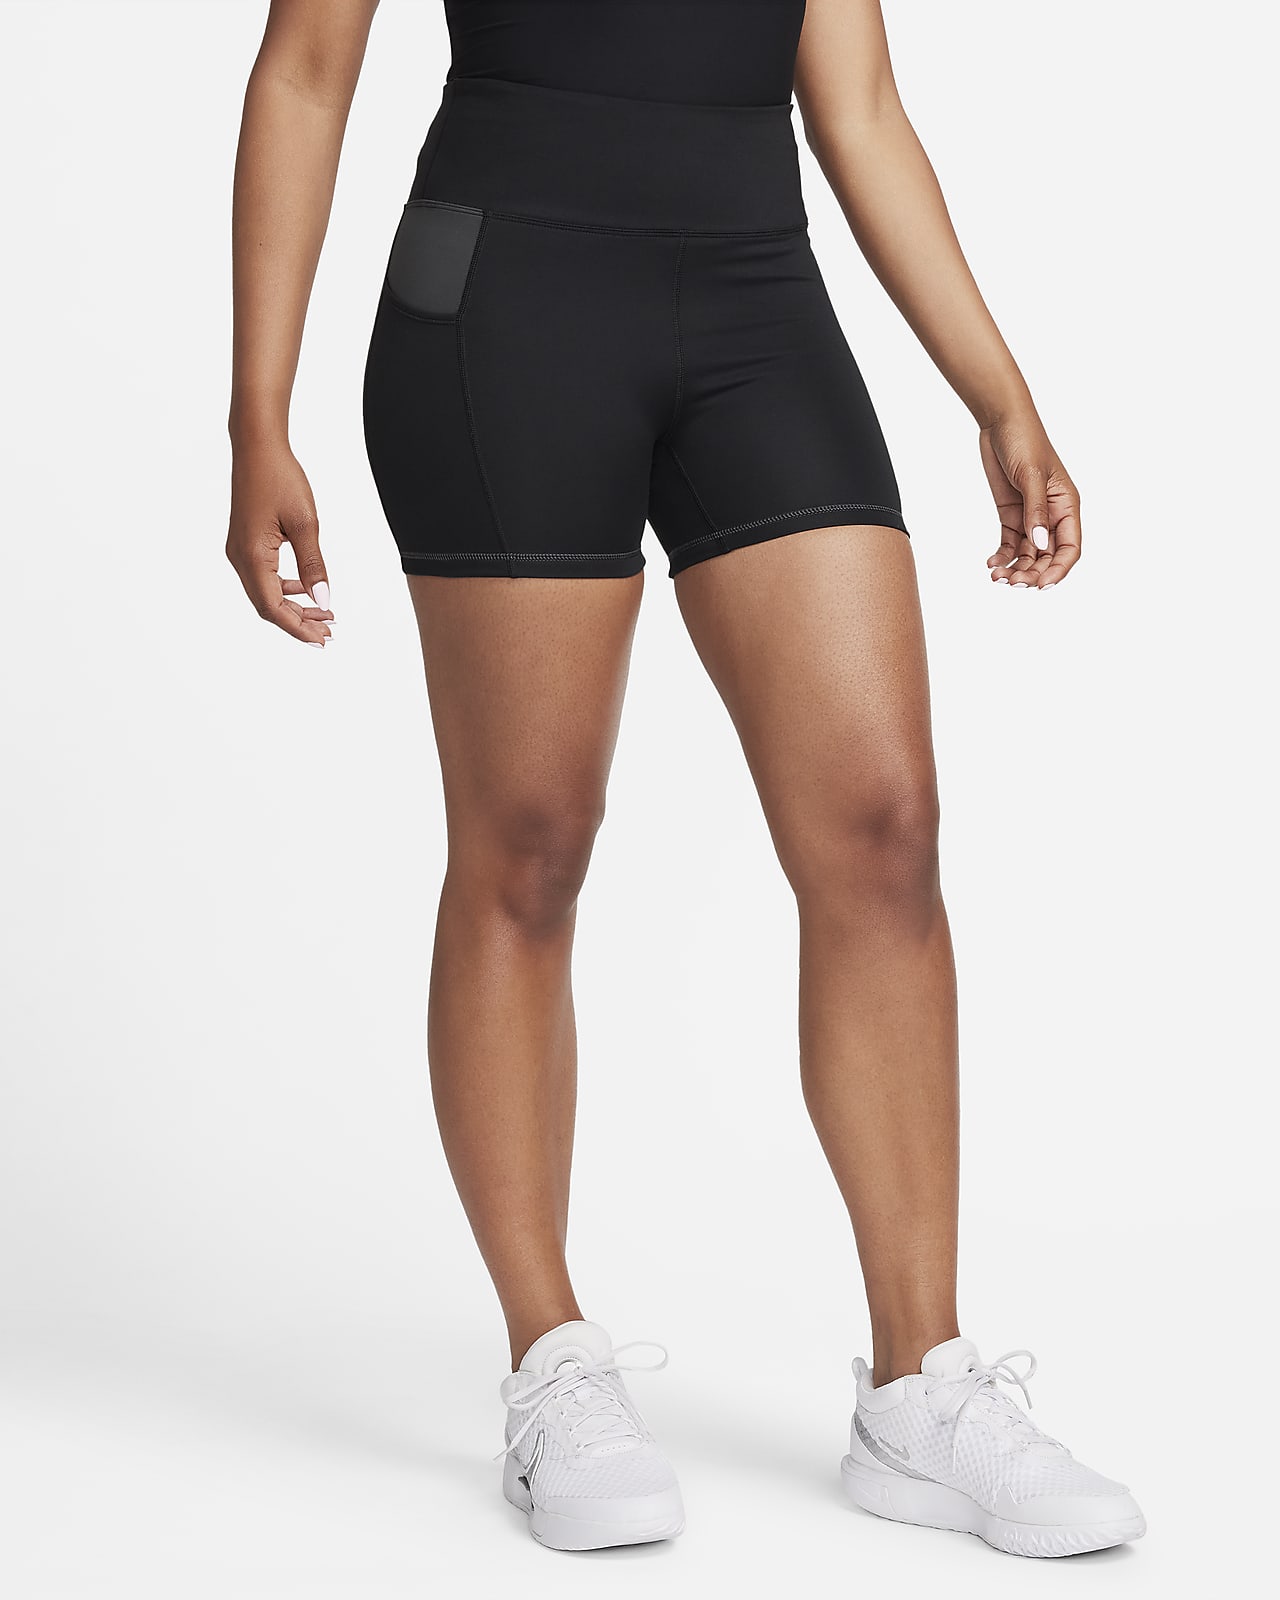 Nike Dri-FIT SE Women's High-Waisted 4 Shorts with Pockets